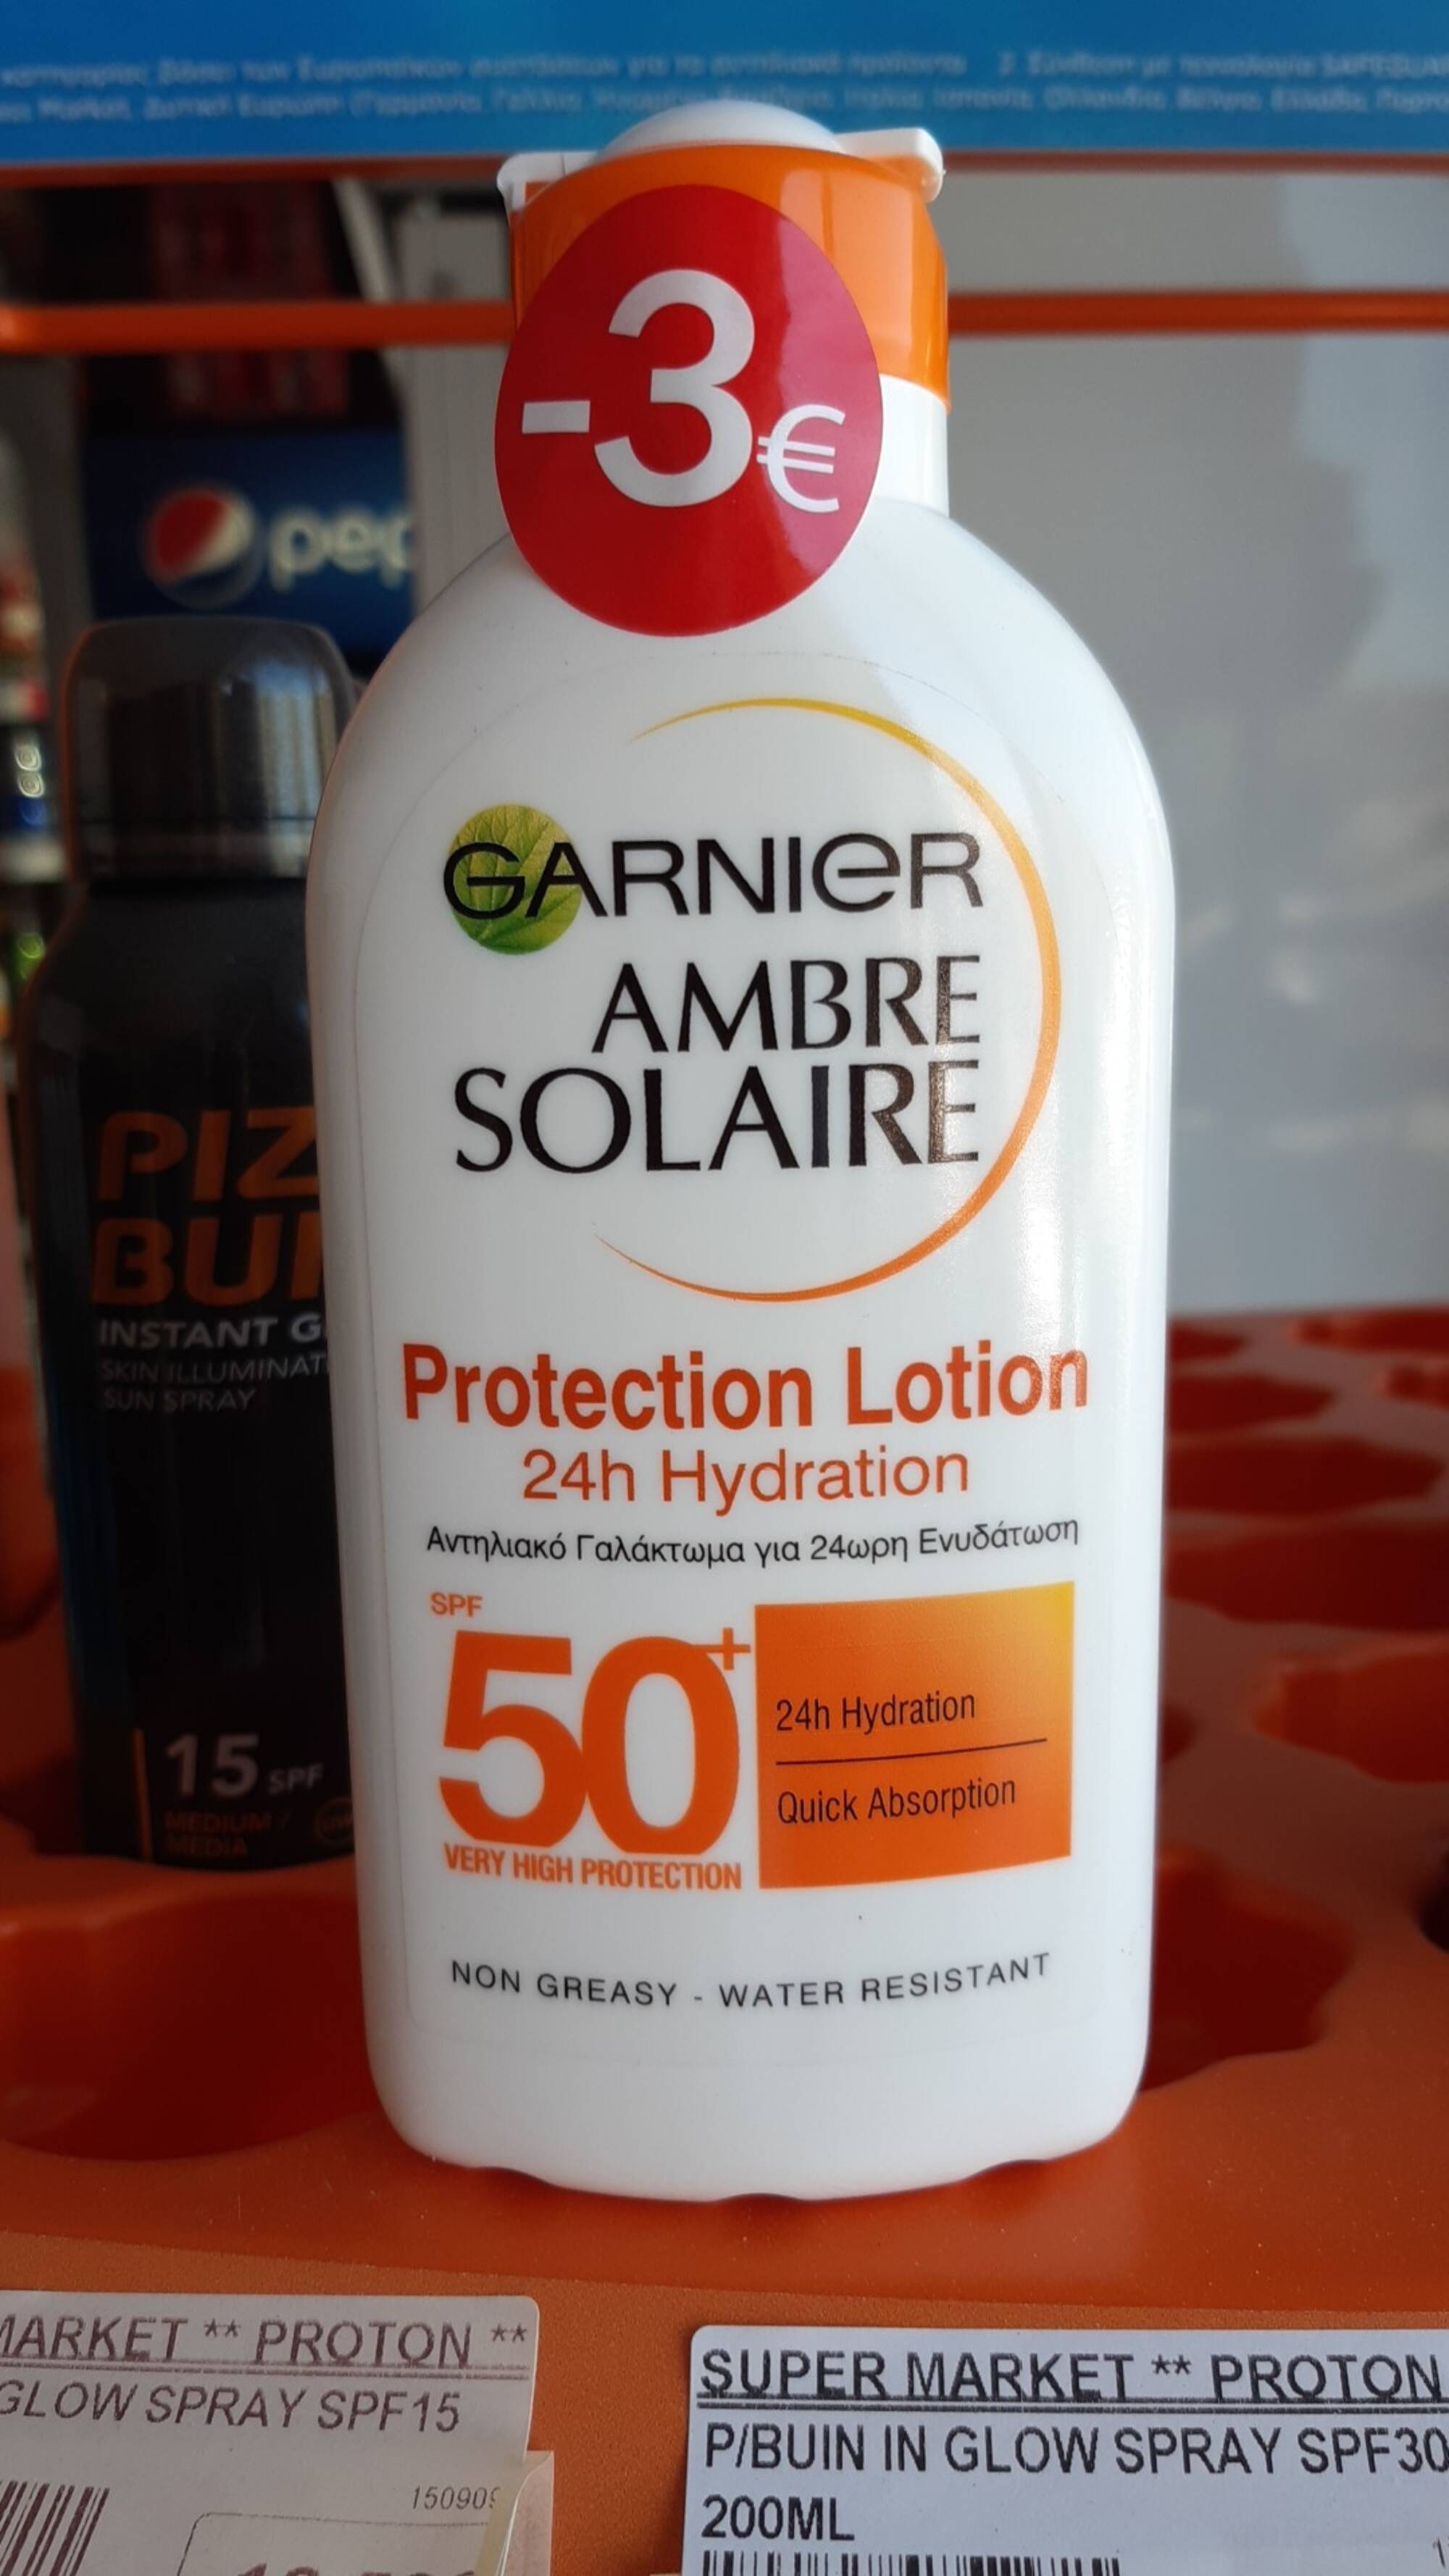 GARNIER - Ambre solaire - Protection lotion 24h hydration SPF 50+